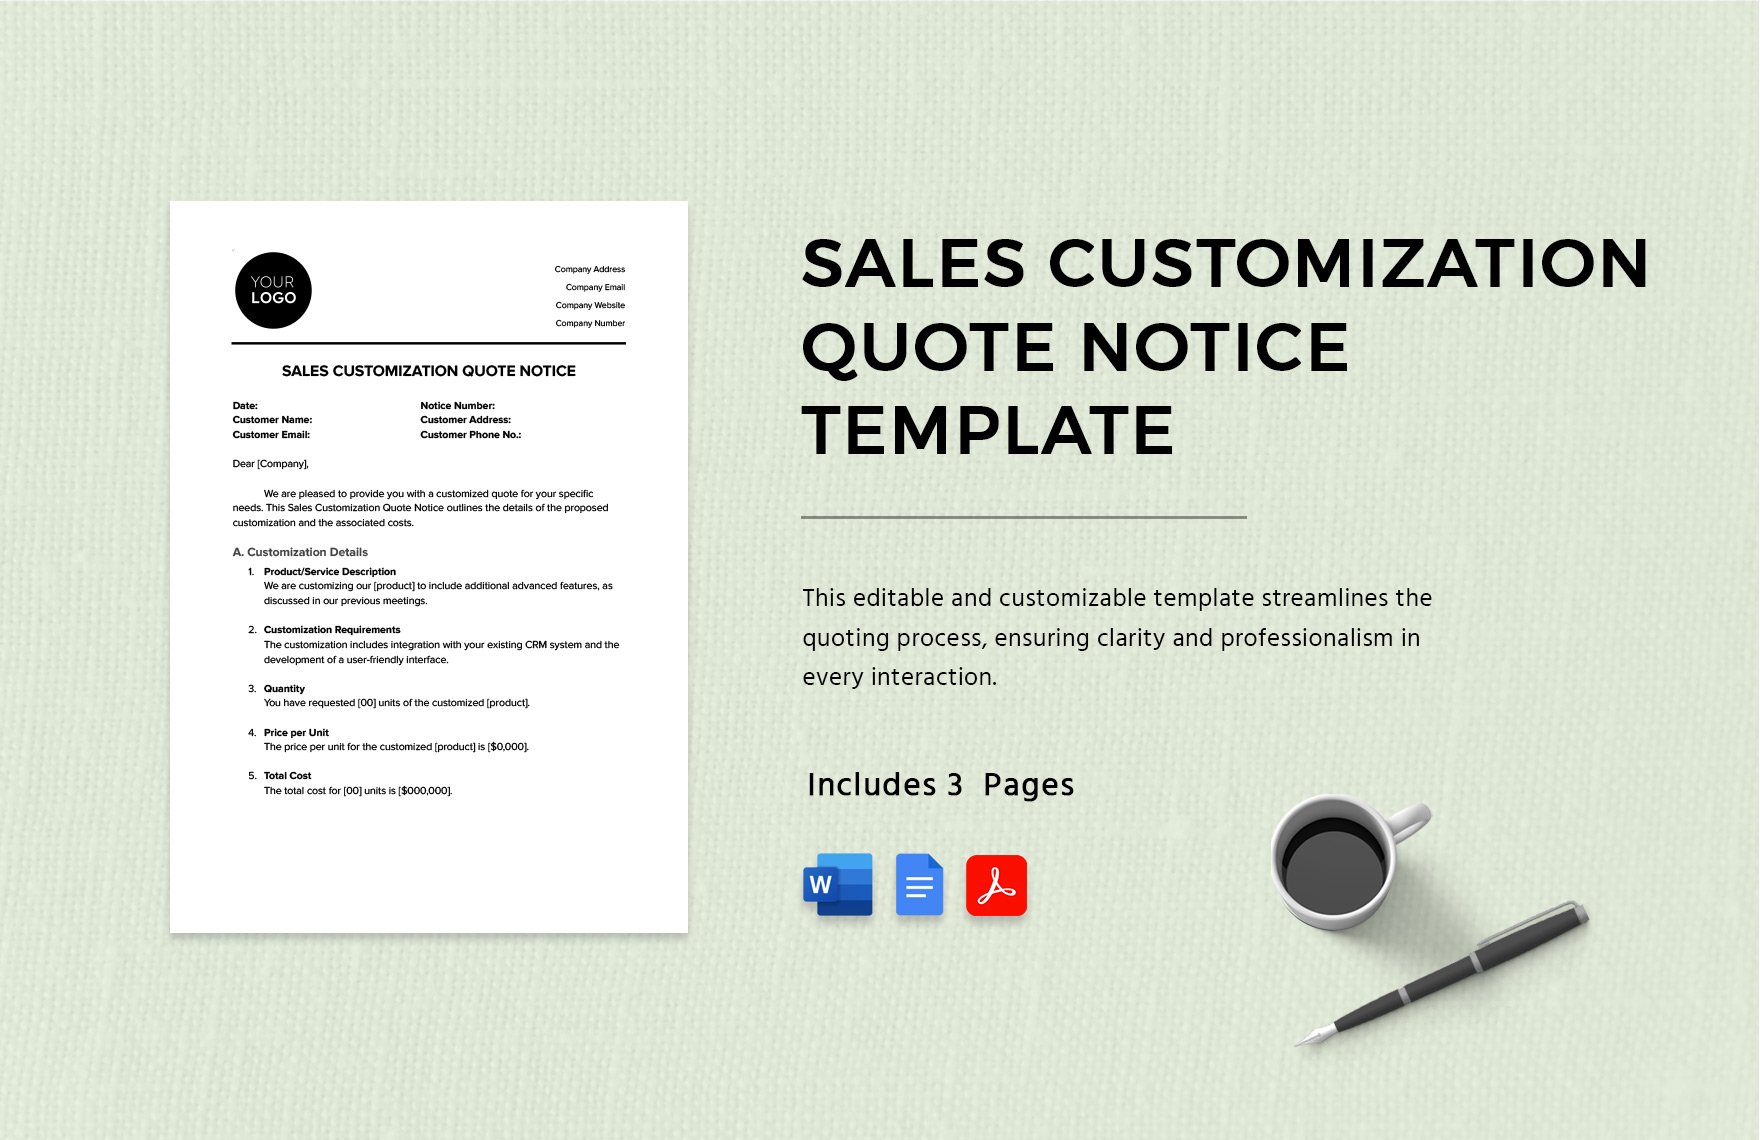 Sales Customization Quote Notice Template in Word, Google Docs, PDF